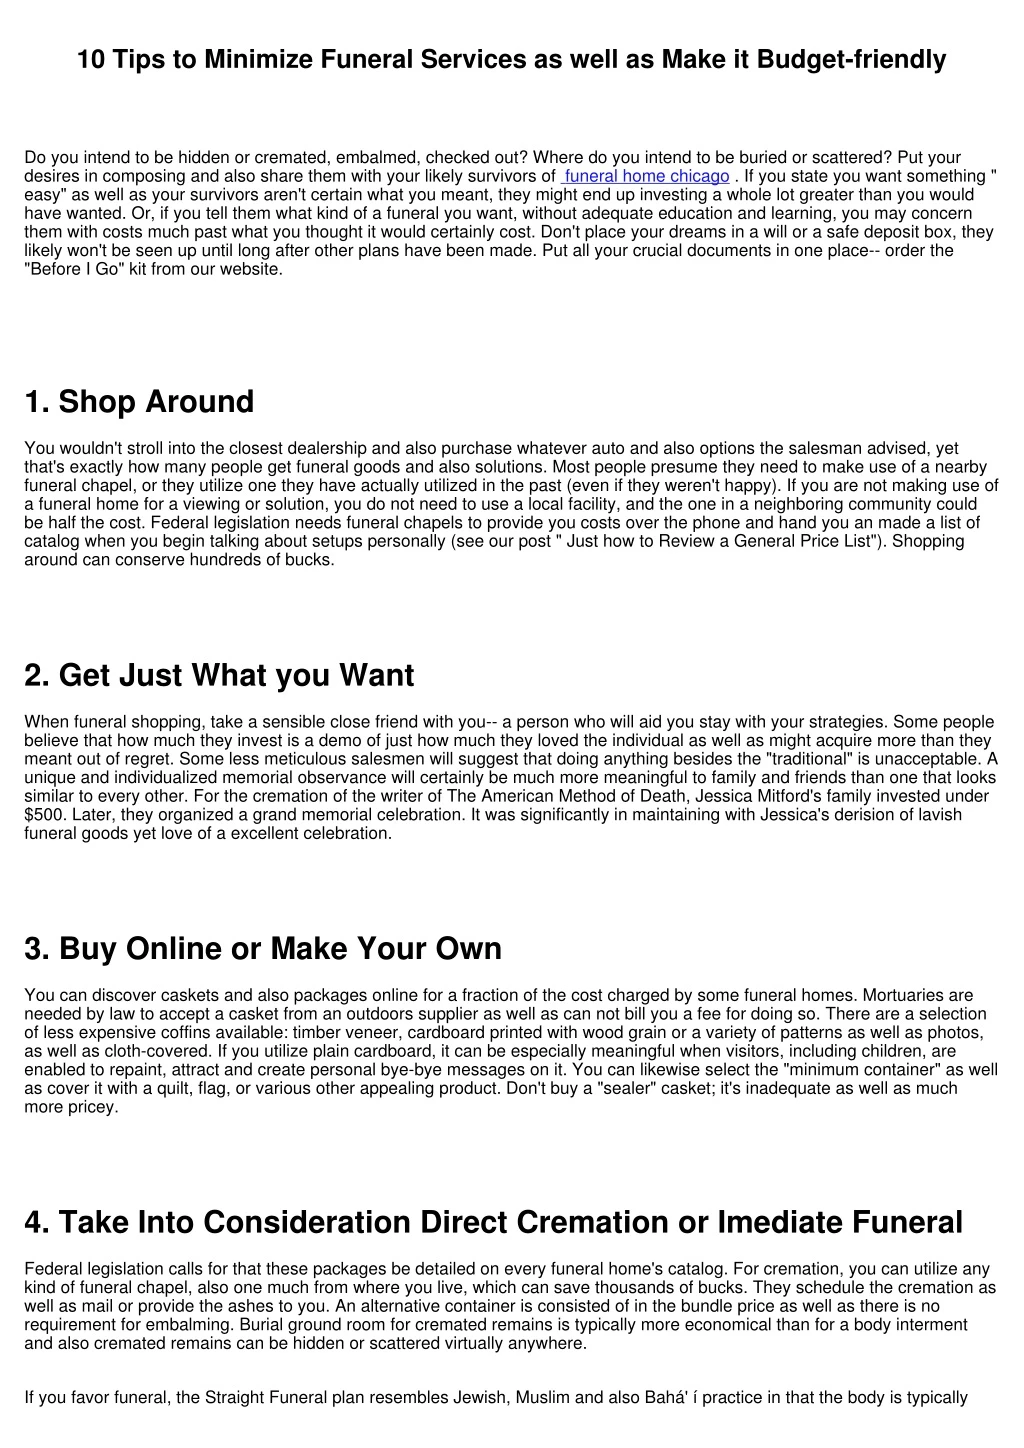 10 tips to minimize funeral services as well